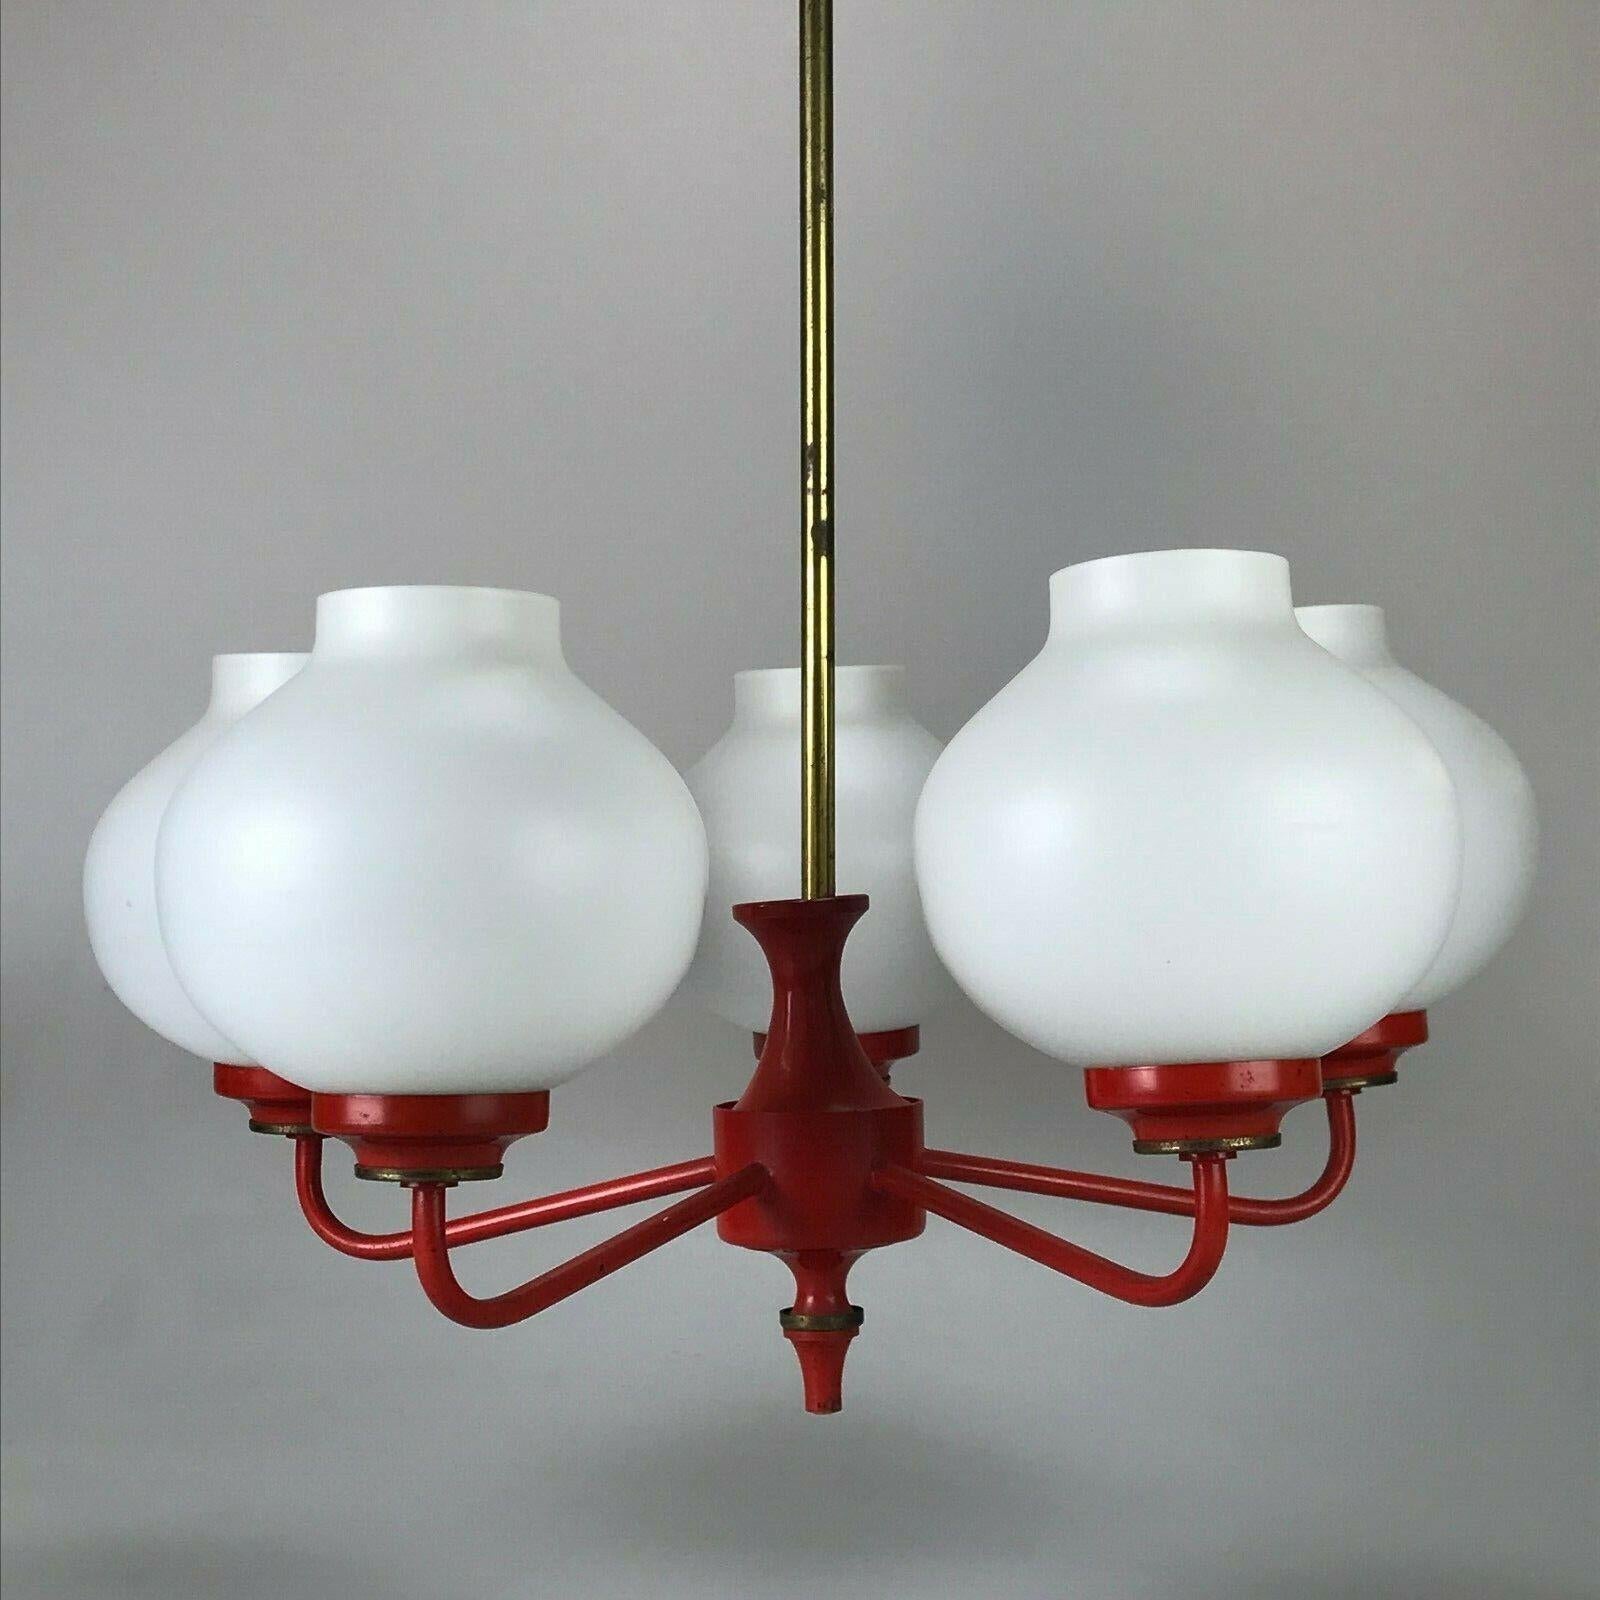 70s Lamp light ceiling lamp chandelier ball lamp space age design

Object: ceiling lamp

Manufacturer:

Condition: good vintage

Age: around 1960-1970

Dimensions:

Diameter = 43cm
Height = 65cm

Other notes:

The pictures serve as